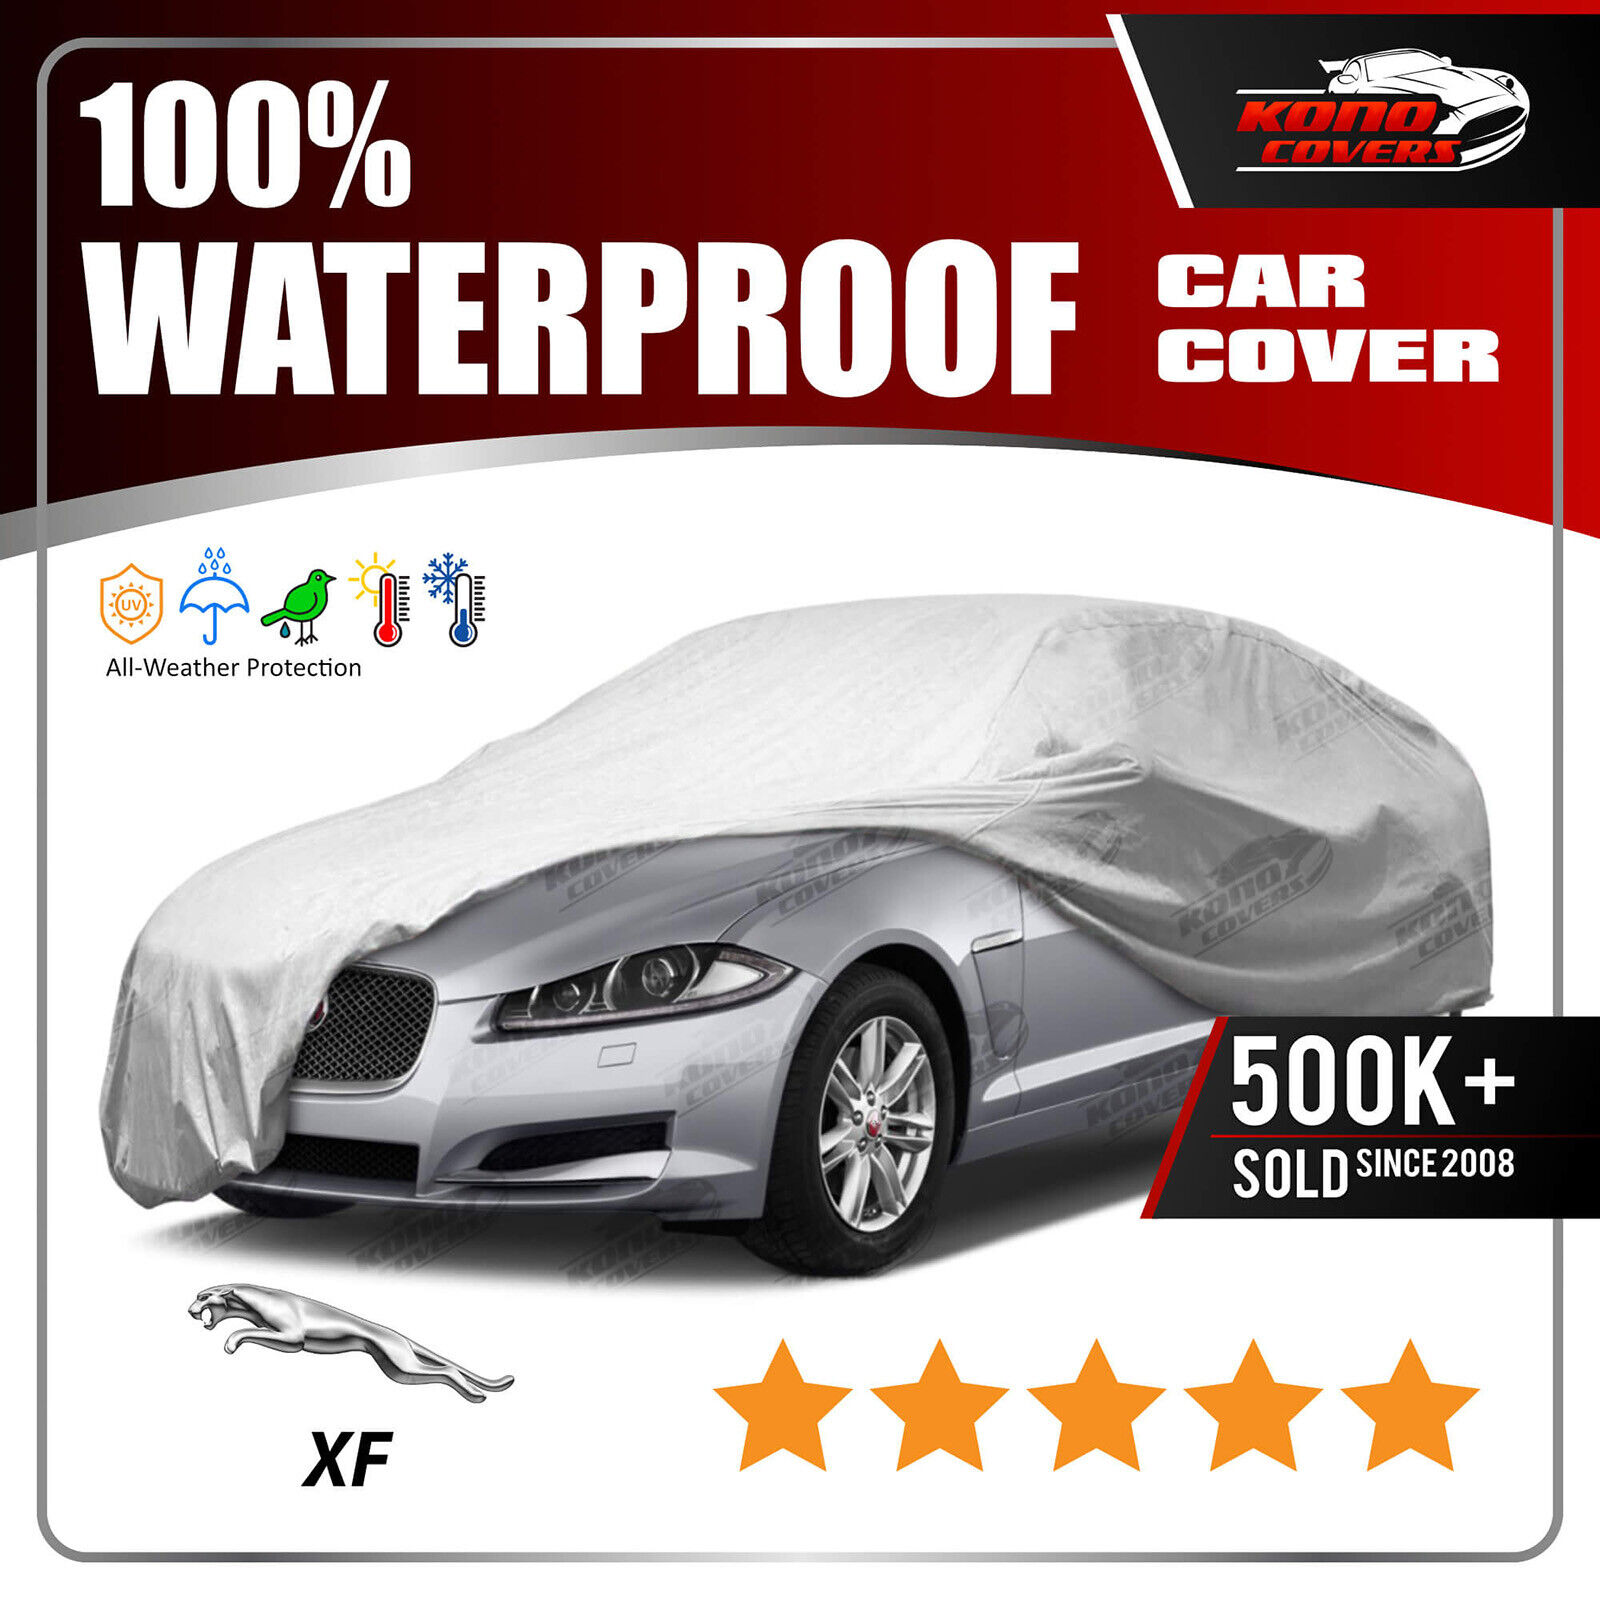 Jaguar XF 2008 2009 2010 2011 2012 2013 2014 2015 CAR COVER - 100% ALL-WEATHER